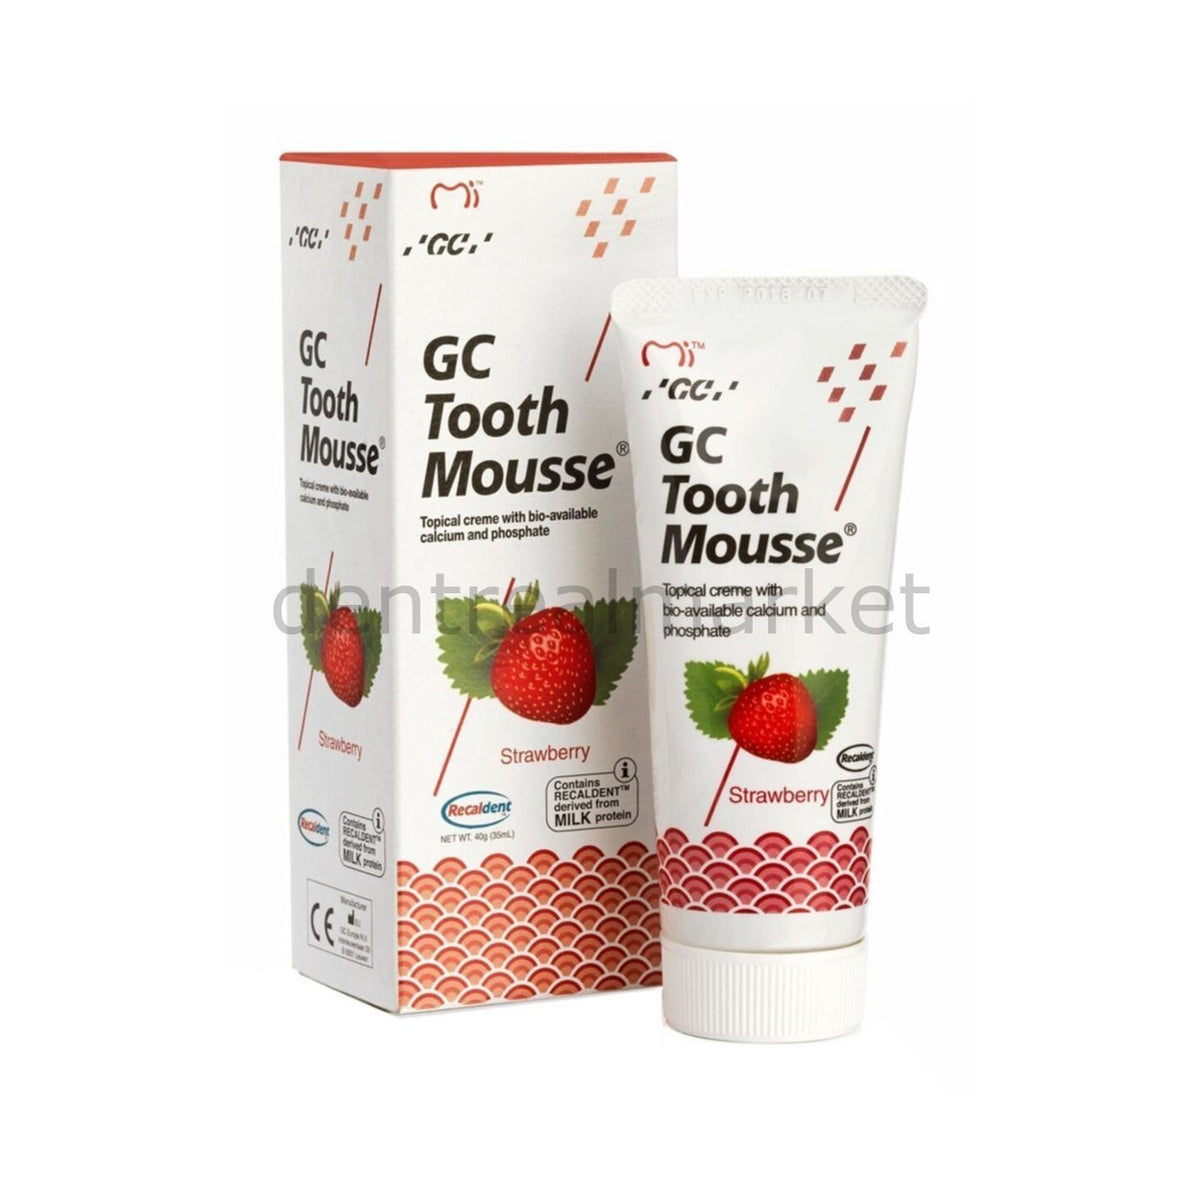 DentrealStore - Gc Dental Tooth Mousse Topical Cream 40 Gr - Strawberry